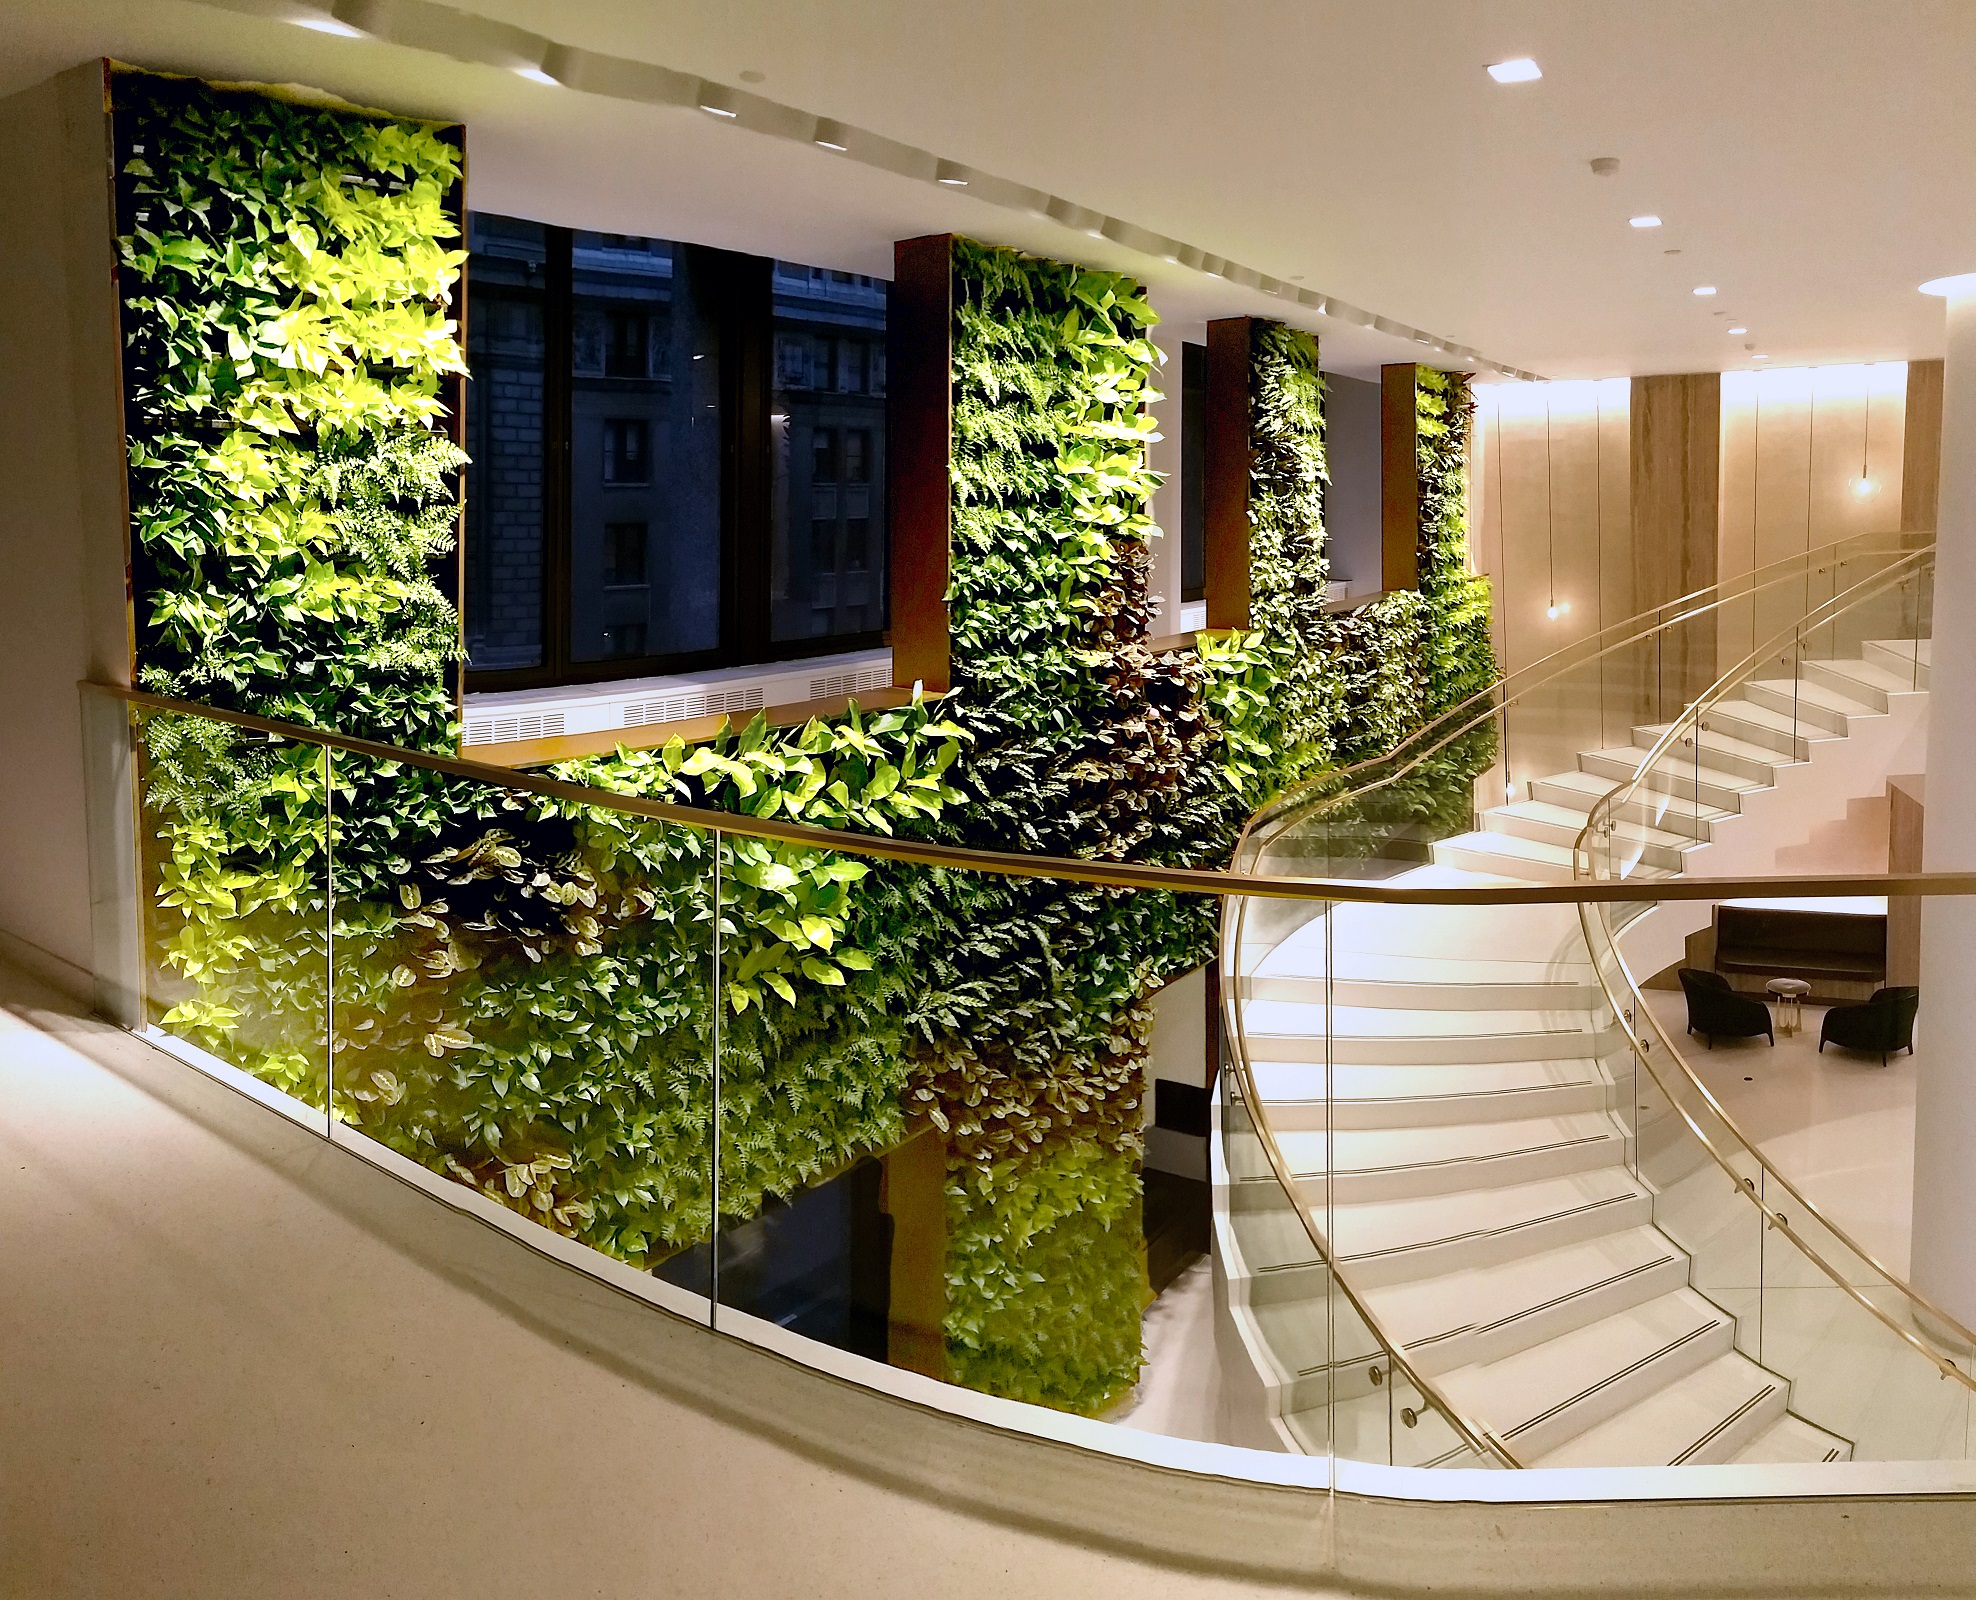 The juxtaposition of organic and rectilinear form of this living wall creates a dynamic backdrop for the centralized atrium and